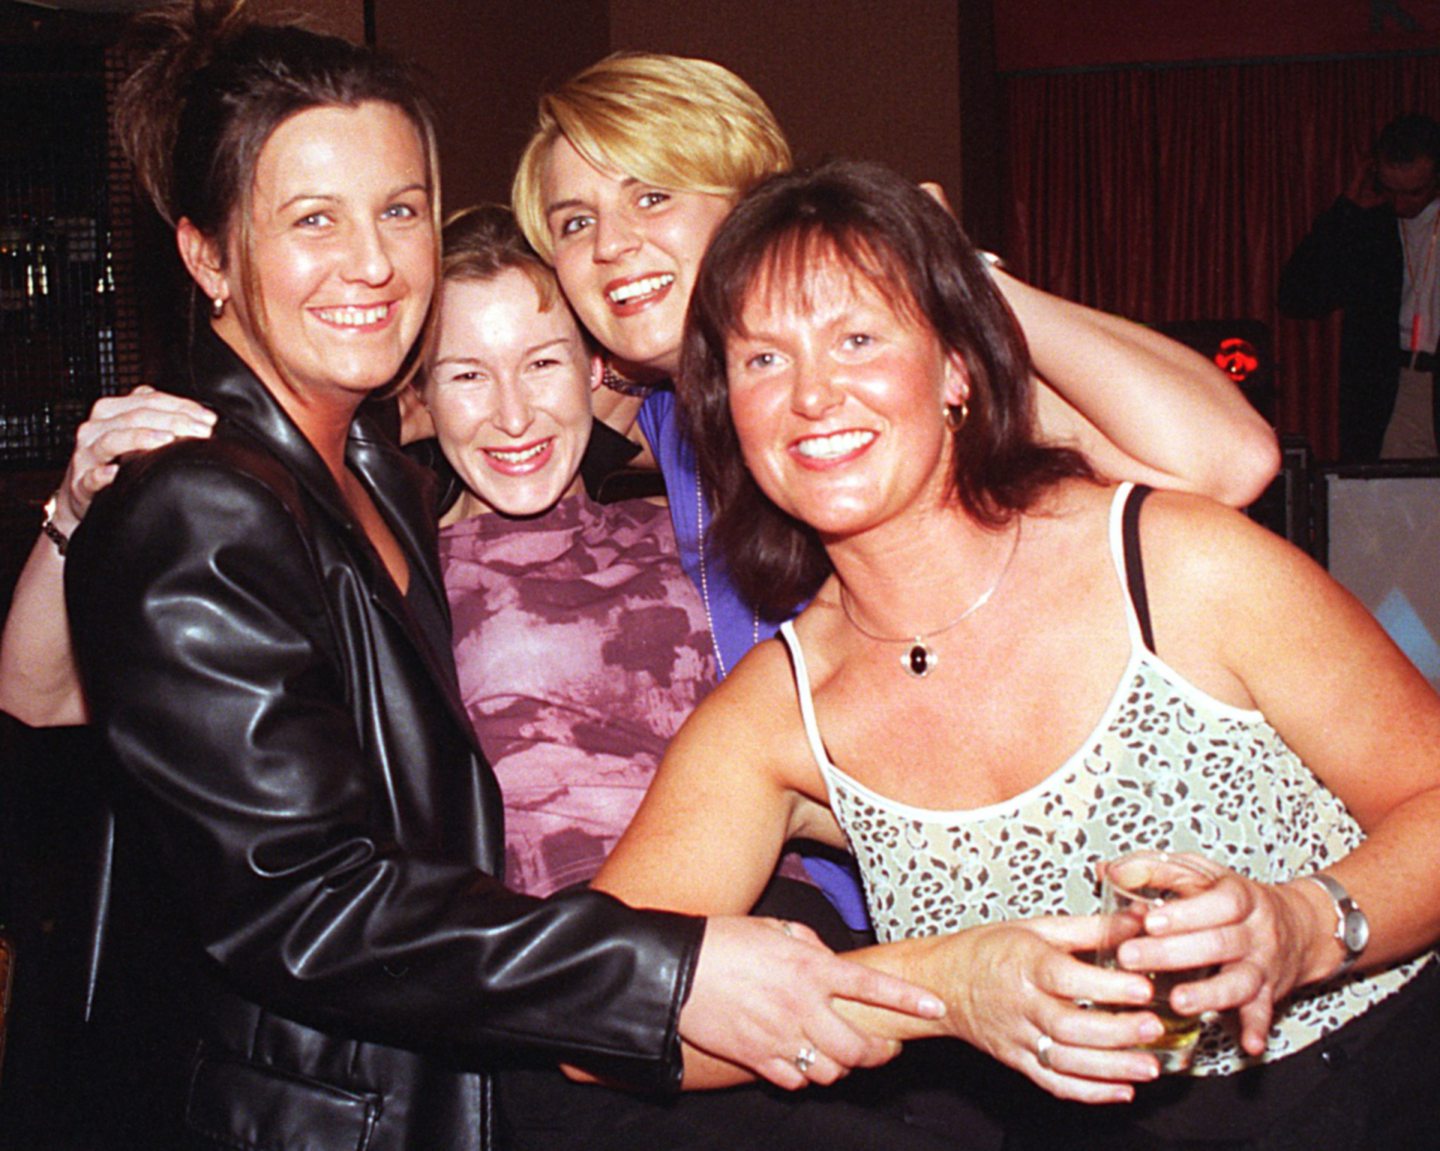 The staff of the Foodhall department of Marks and Spencer, Michelle Christie, Caroline Christie, Elaine McKelvie and Alison Beaton, celebrating their spring night out RUA club, Aberdeen.